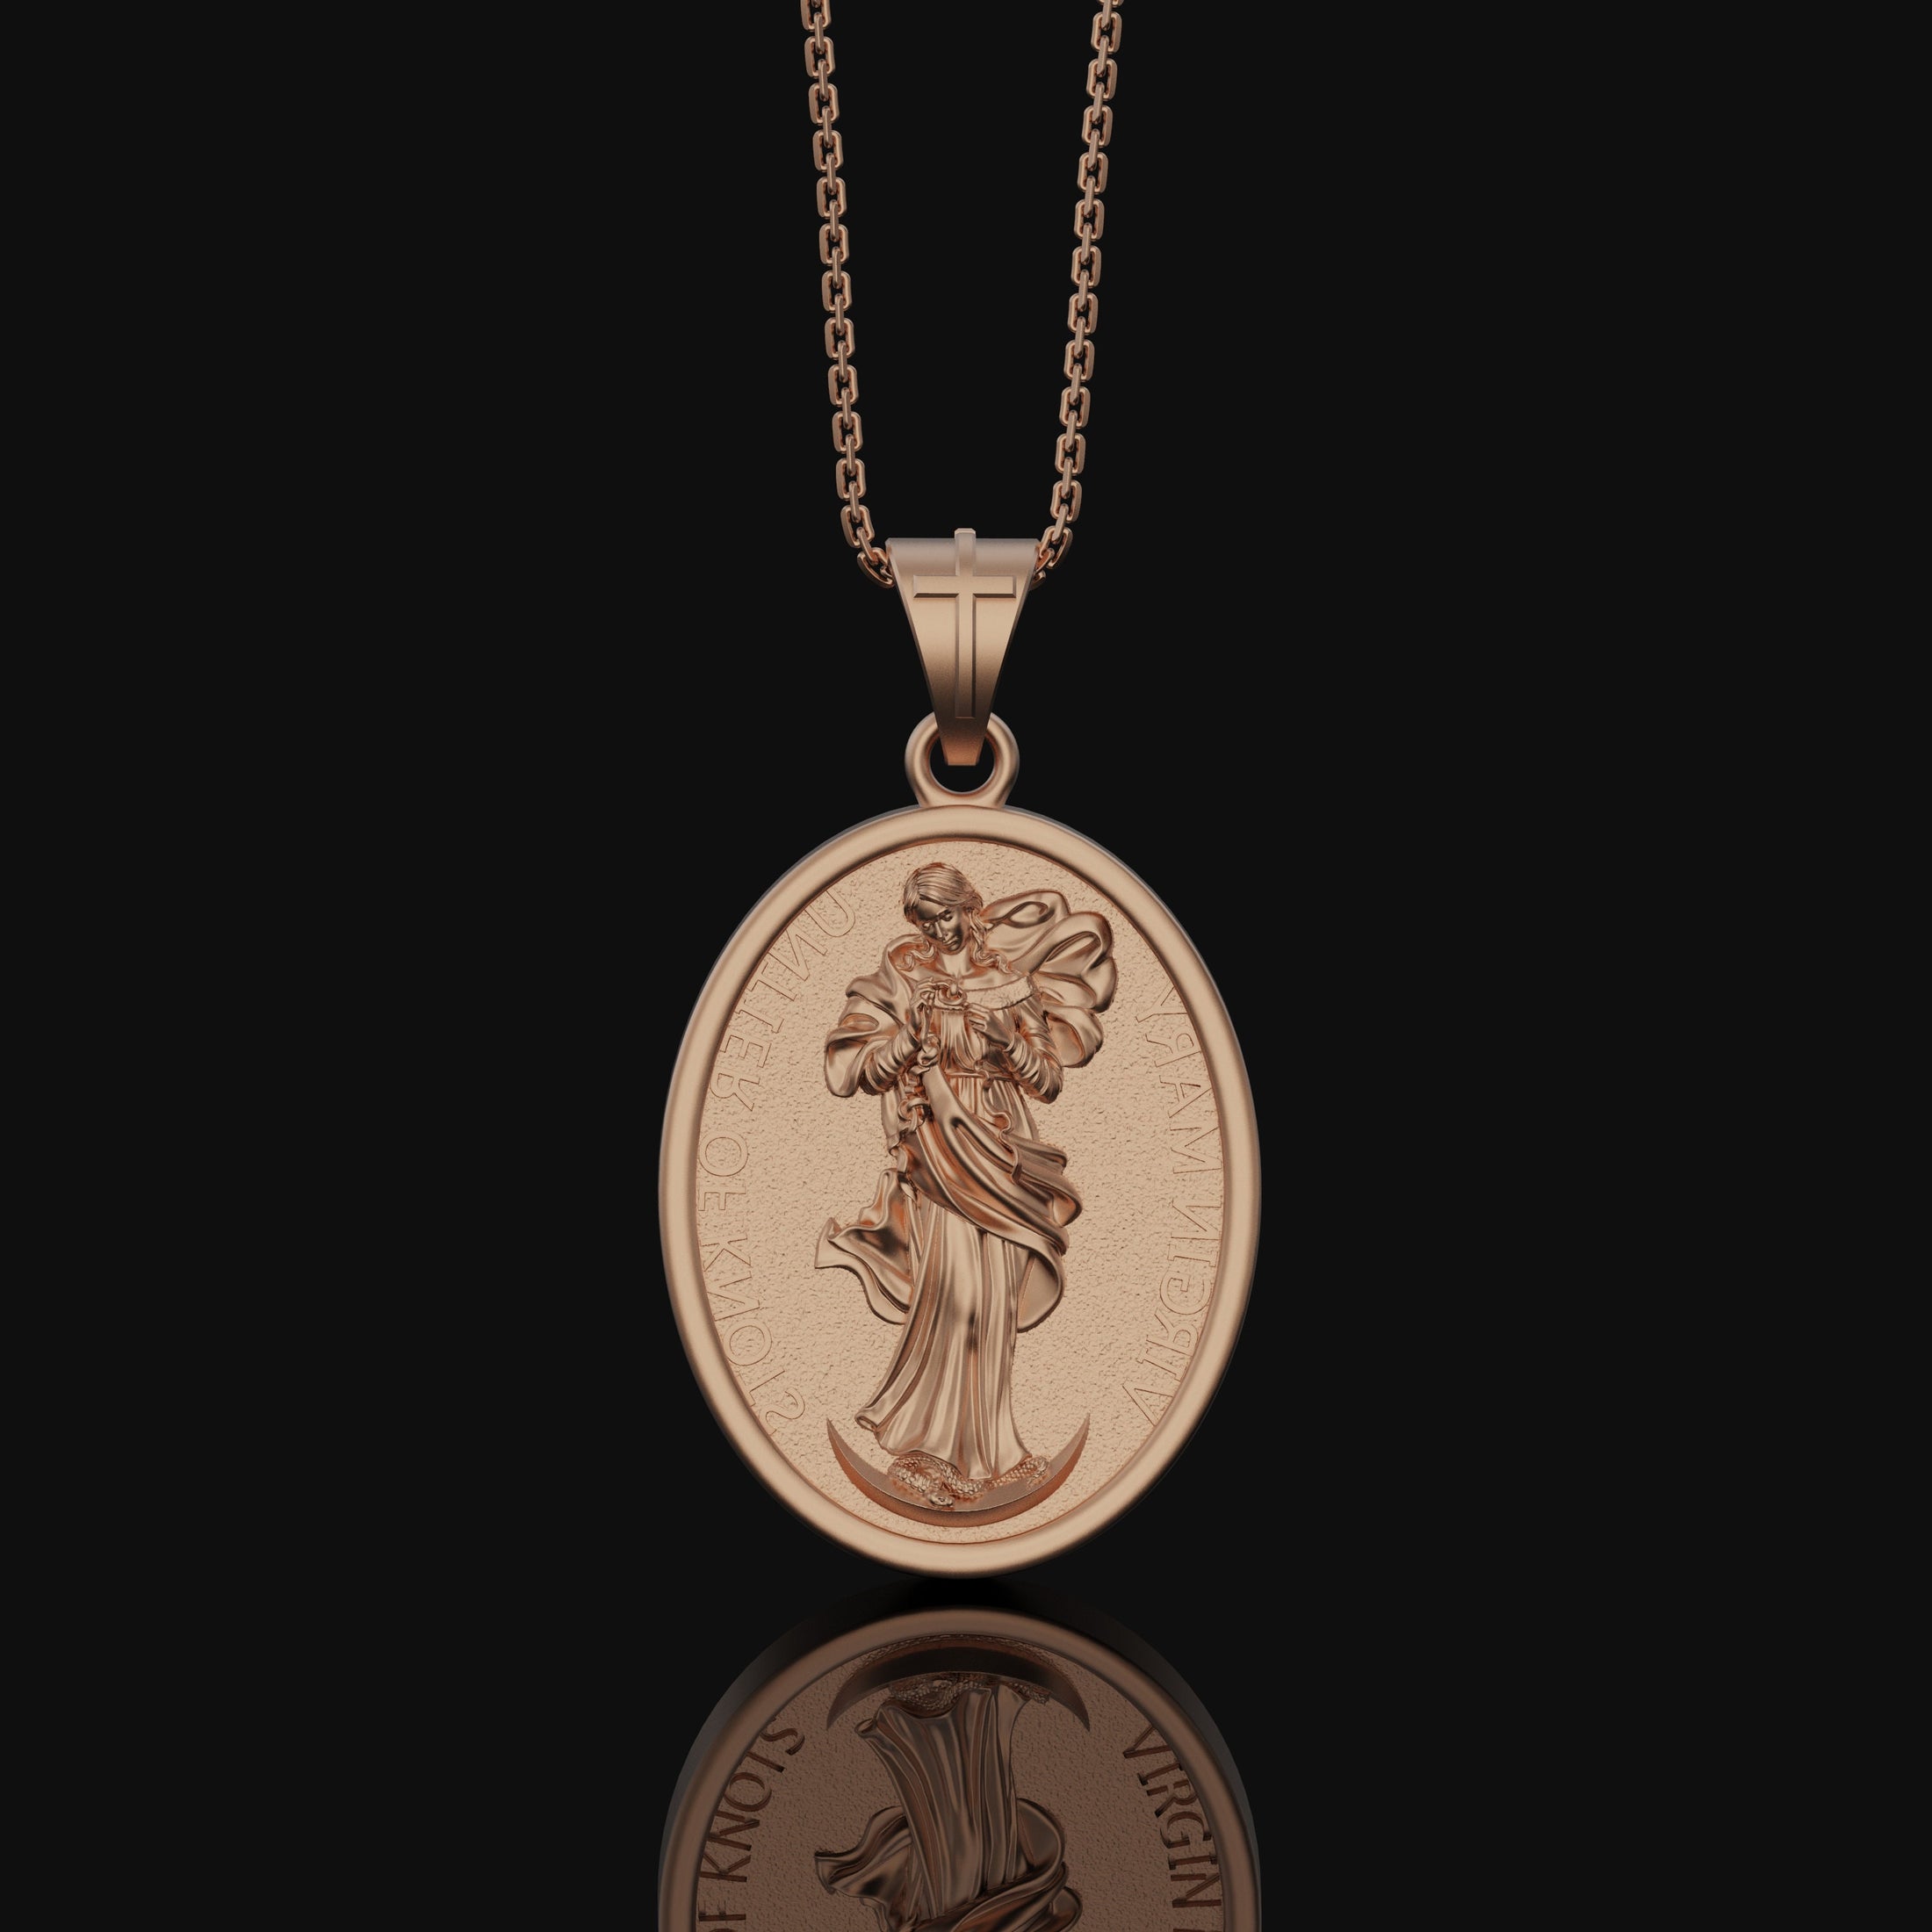 Mary Untier of Knots, Our Lady, Virgin Mary Medal, Virgin Mary, Catholic Gift, Catholic Medals, Confirmation Gift, Christian Jewelry Rose Gold Finish